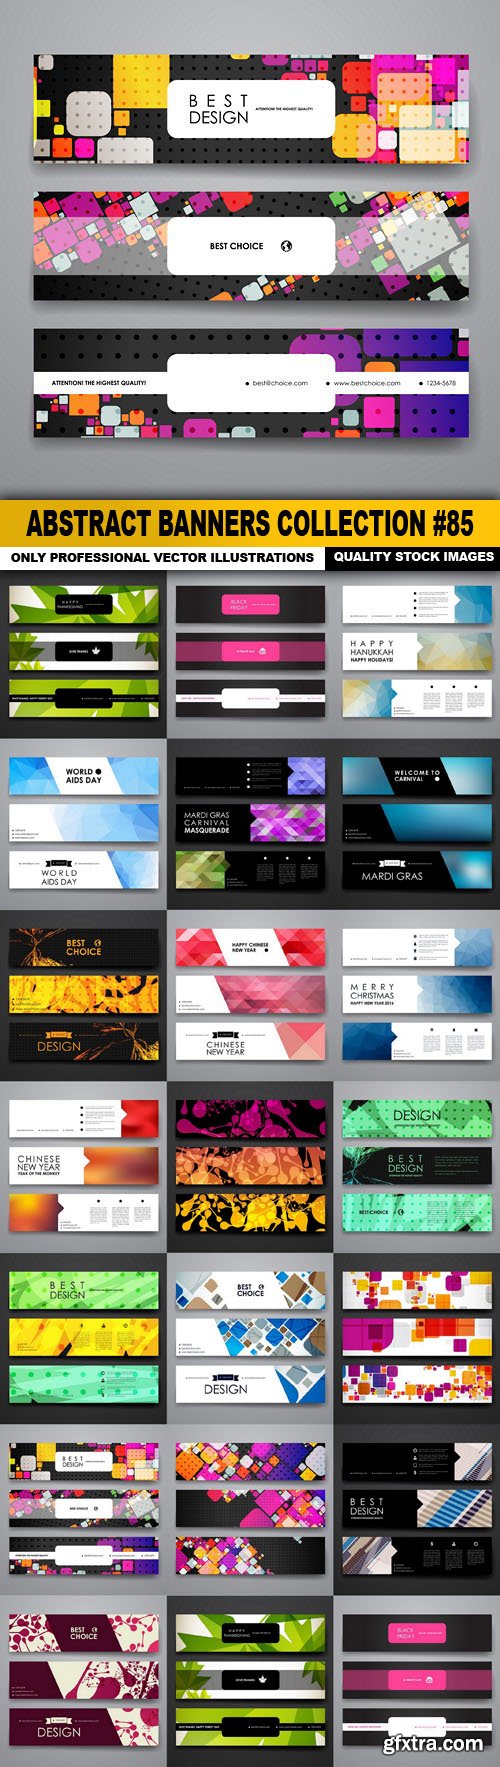 Abstract Banners Collection #85 - 20 Vectors